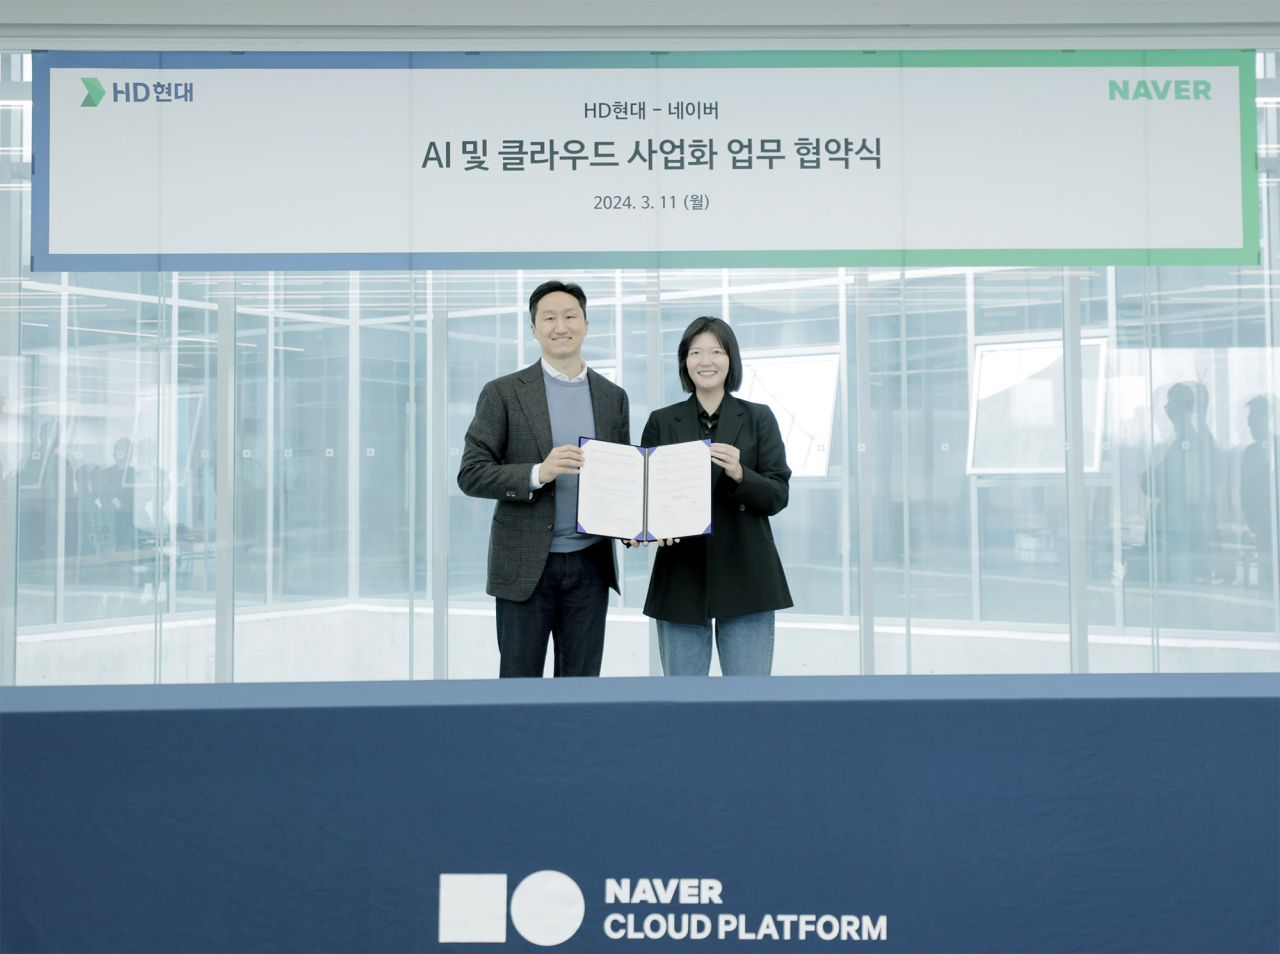 HD Hyundai Vice Chairman Chung Ki-sun (left) and Naver CEO Choi Soo-yeon pose for a photograph after signing a memorandum of understanding for cooperation in cloud and artificial intelligence business in Sejong on Monday. (HD Hyundai)